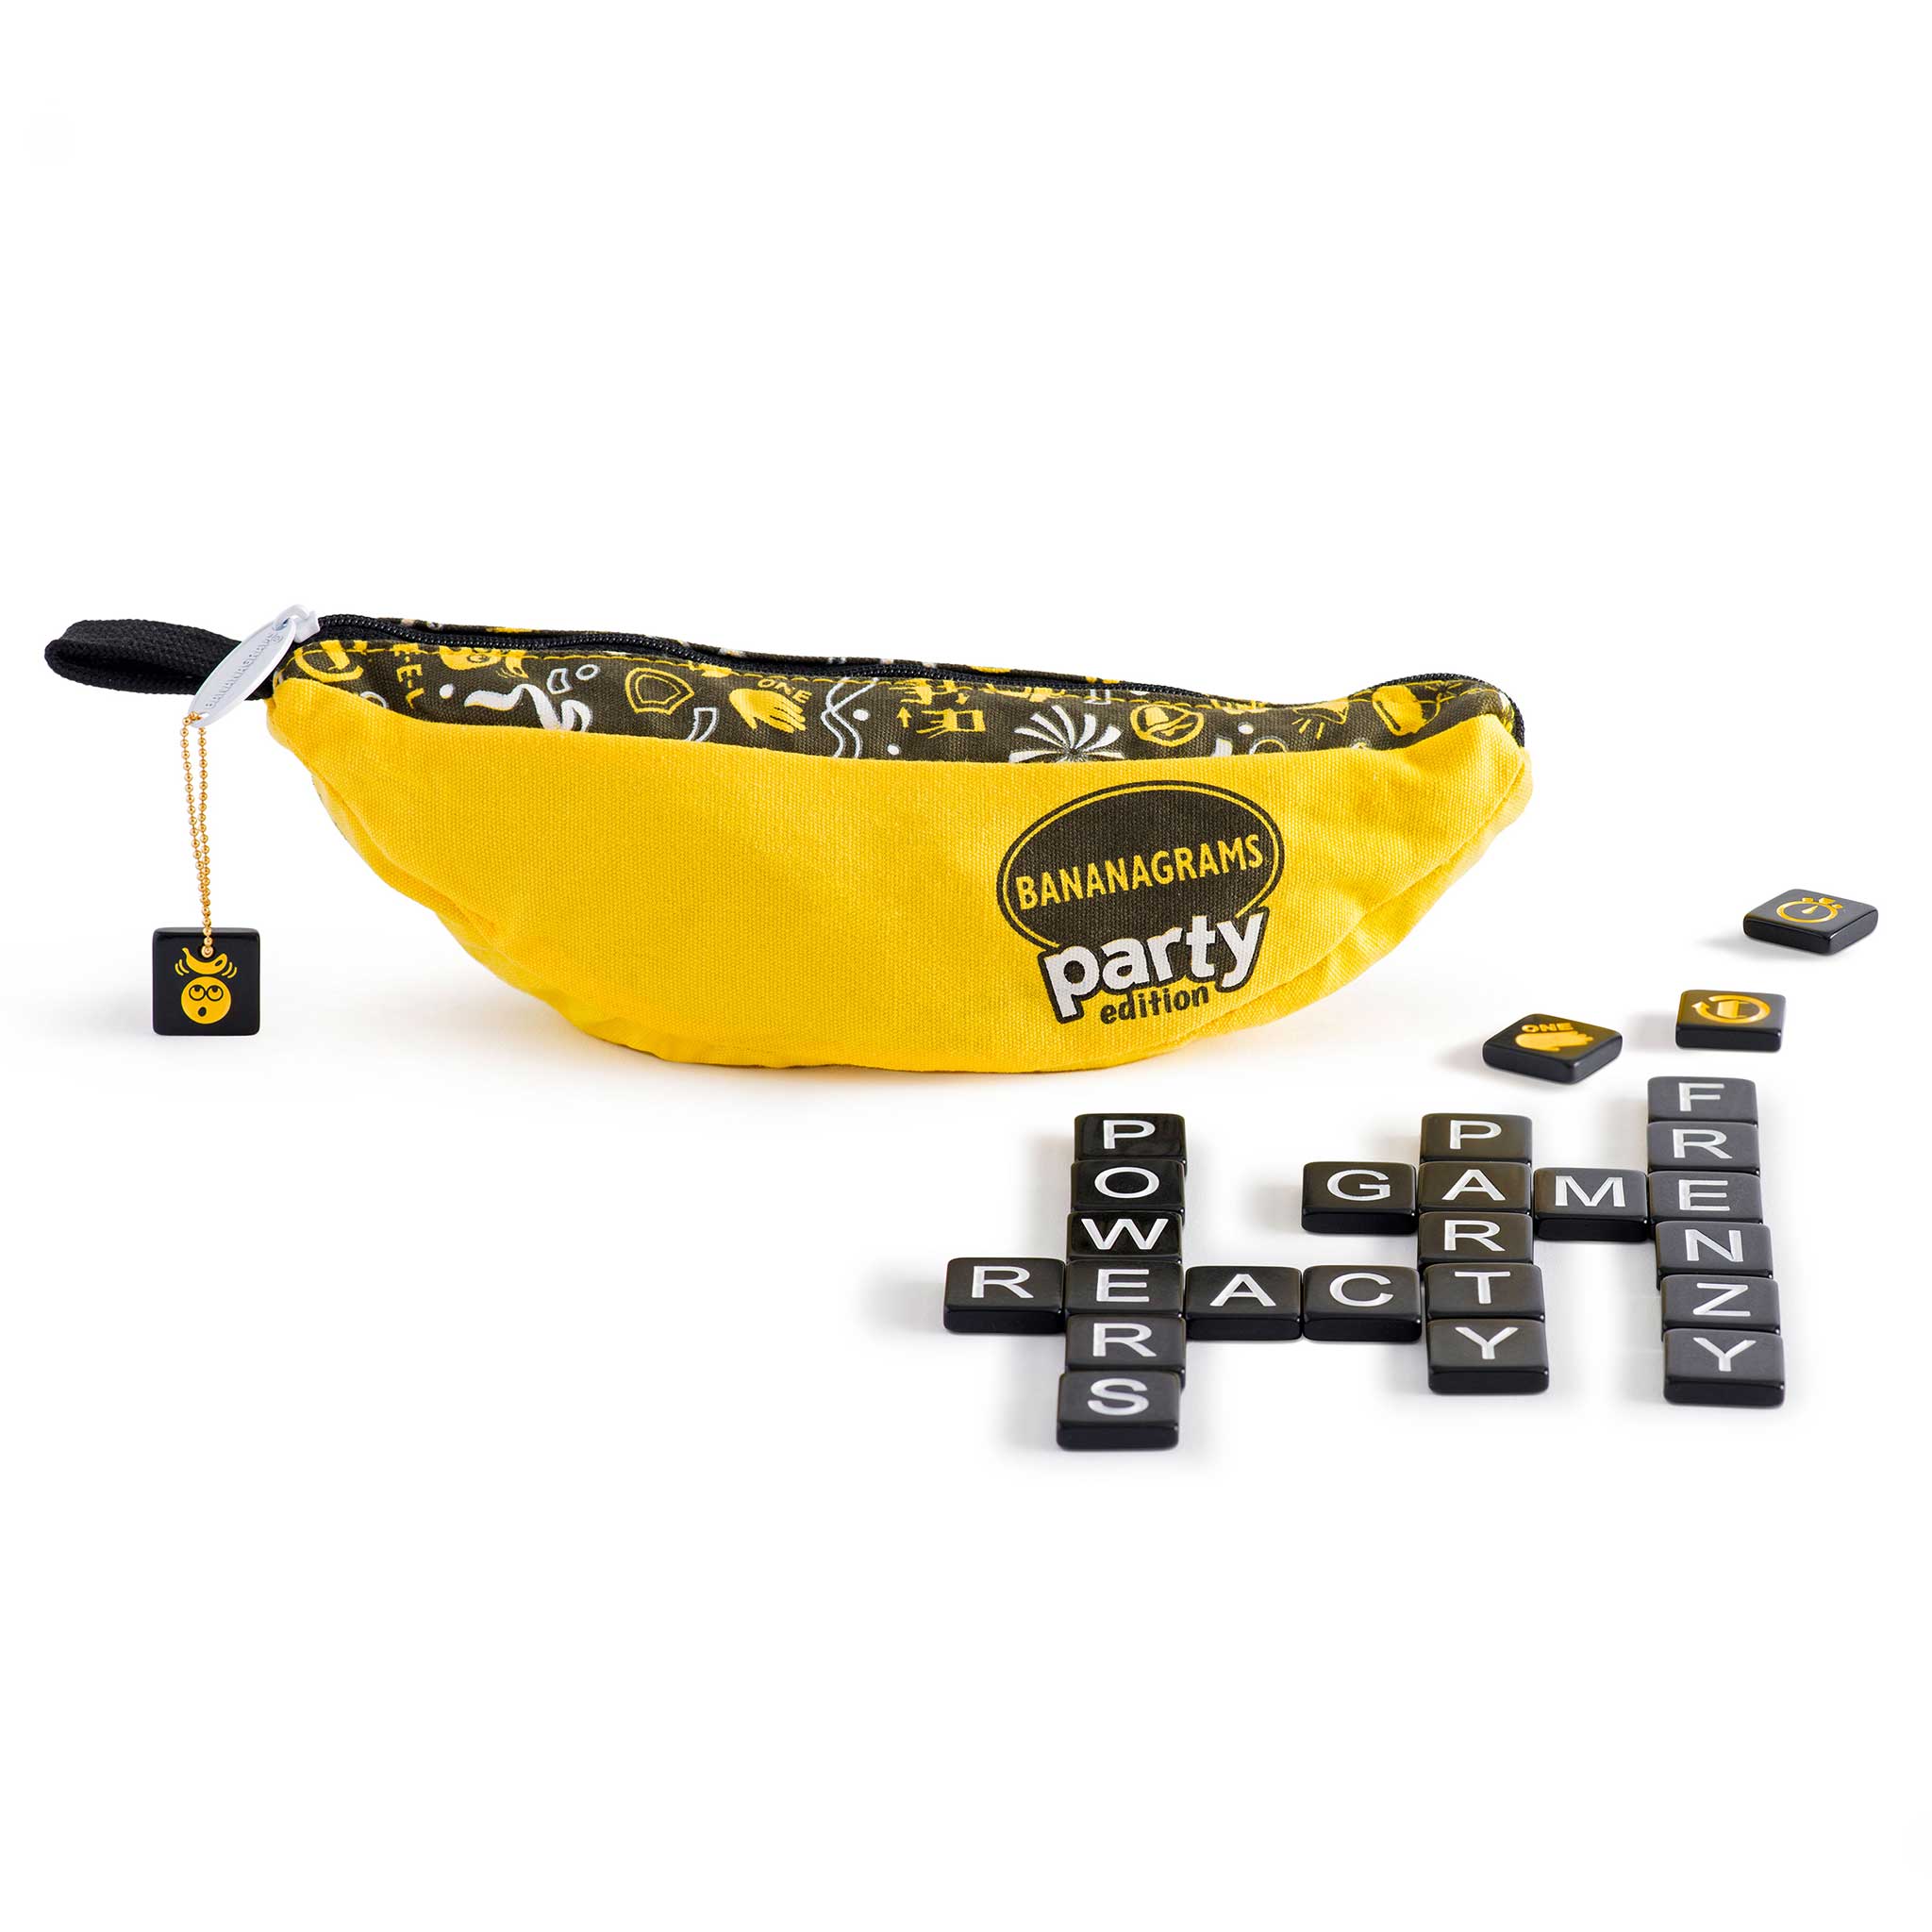 BANANAGRAMS Party Edition pouch and tiles